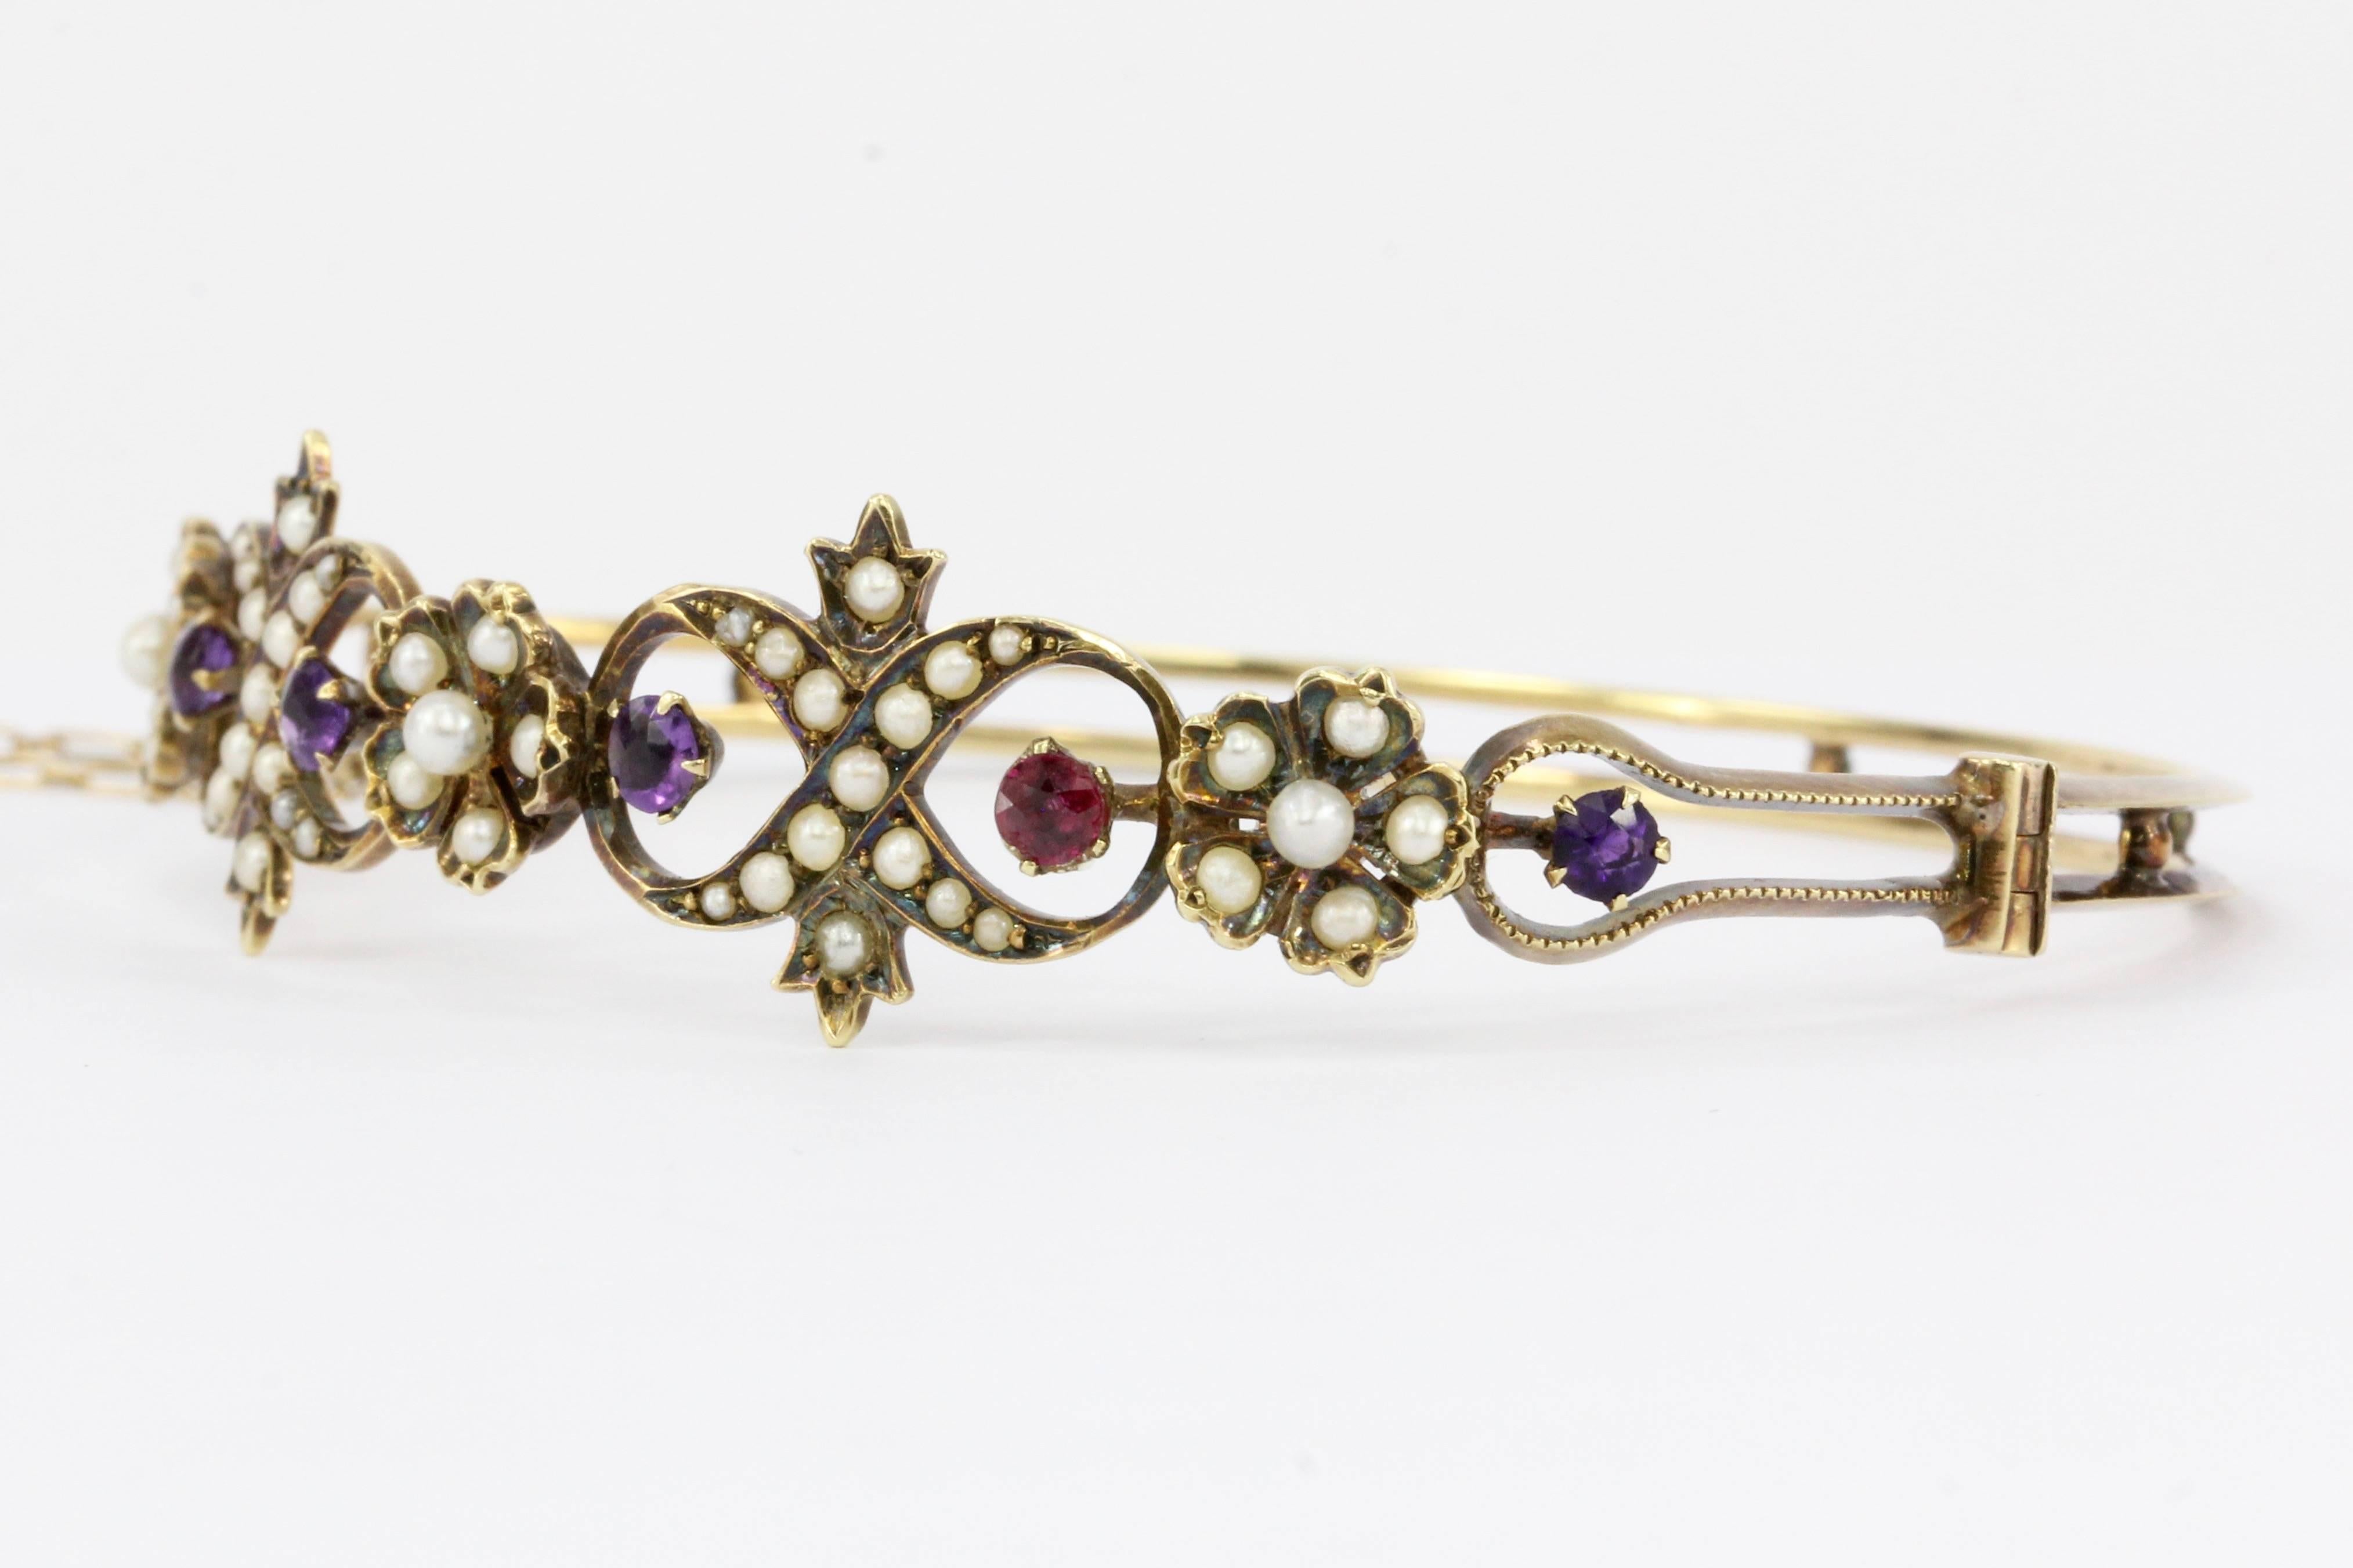 Era: Late Victorian c.1895

Hallmark: 14K 

Makers Mark: Wishbone - L.V. Roy & Co. 1897-1922 Providence, R.I.

Composition: 14K Yellow Gold

Primary Stone: Amethyst 

Secondary Stone: Ruby

Tertiary Stone: Seed Pearl

Bracelet Bangle dimensions: